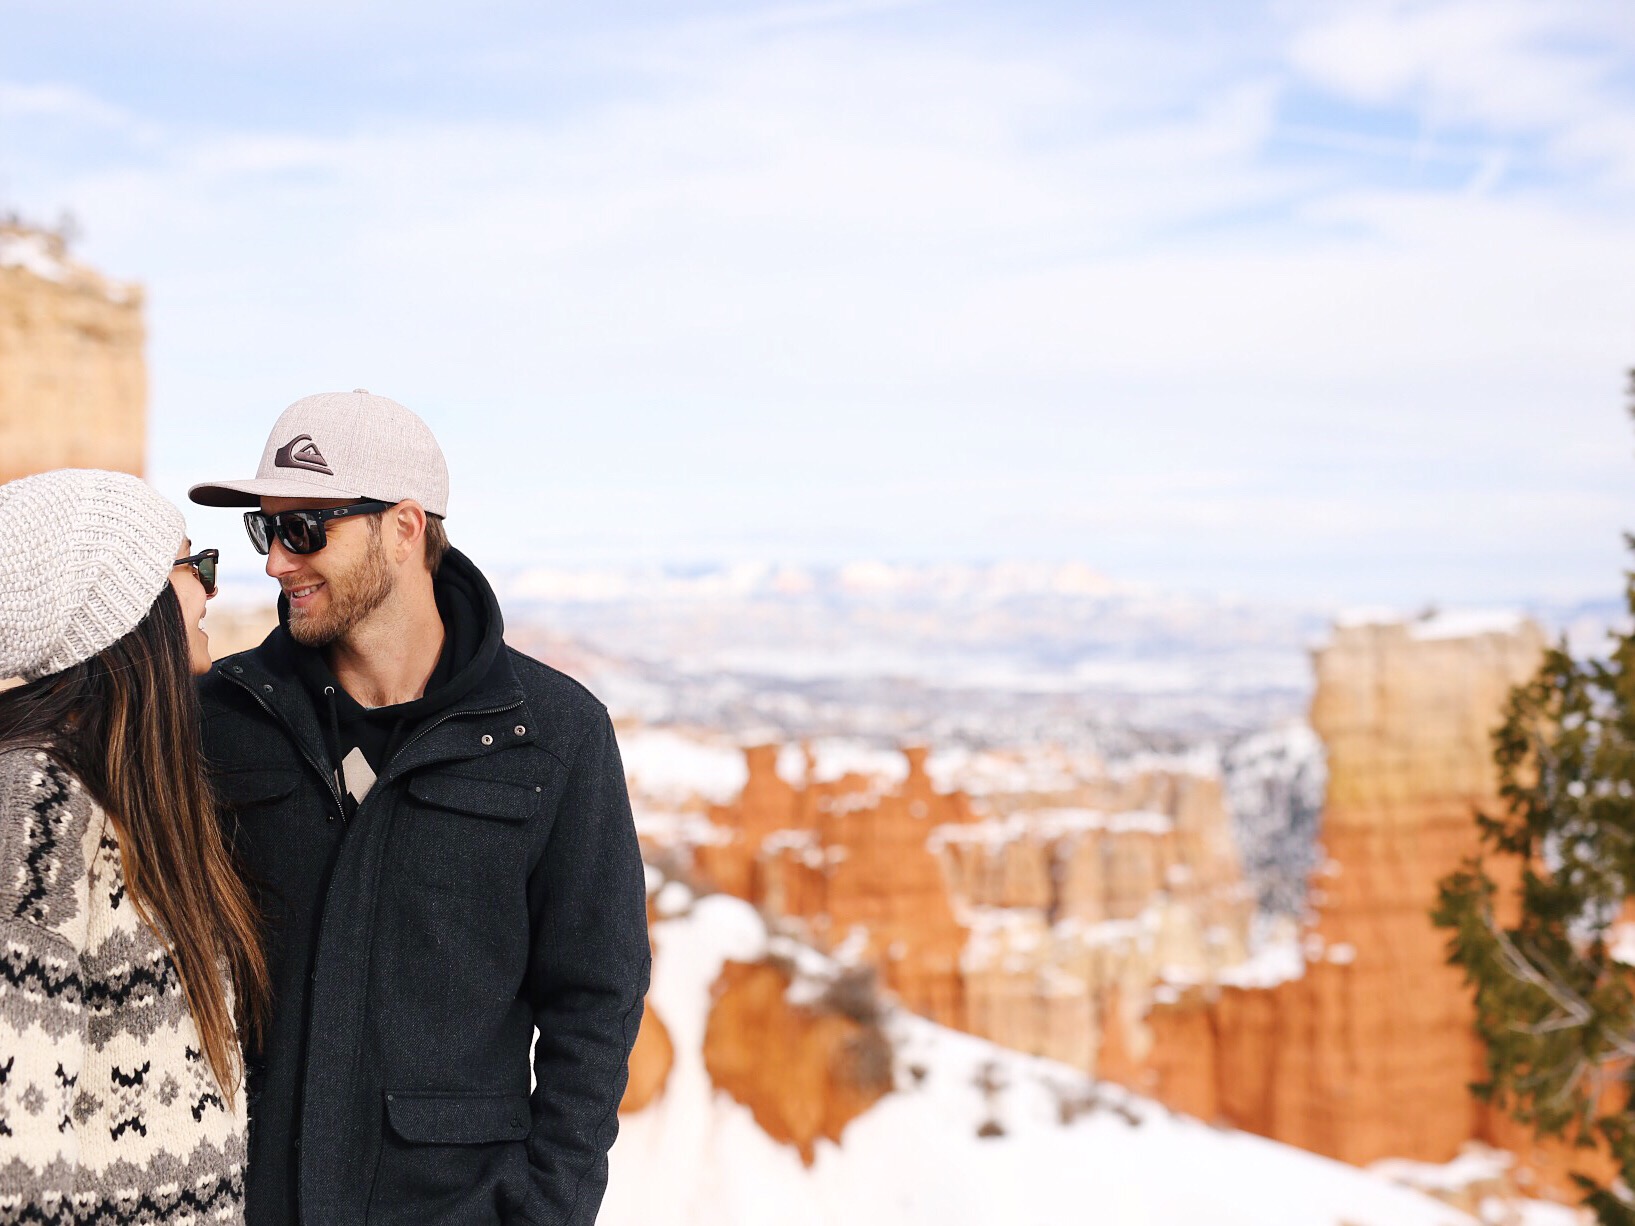 Bryce Canyon National Park During Winter | Digital Nomads | Husband and Wife Team | Agua Canyon, Bryce Canyon National Park | Traveling Southern Utah | elanaloo.com